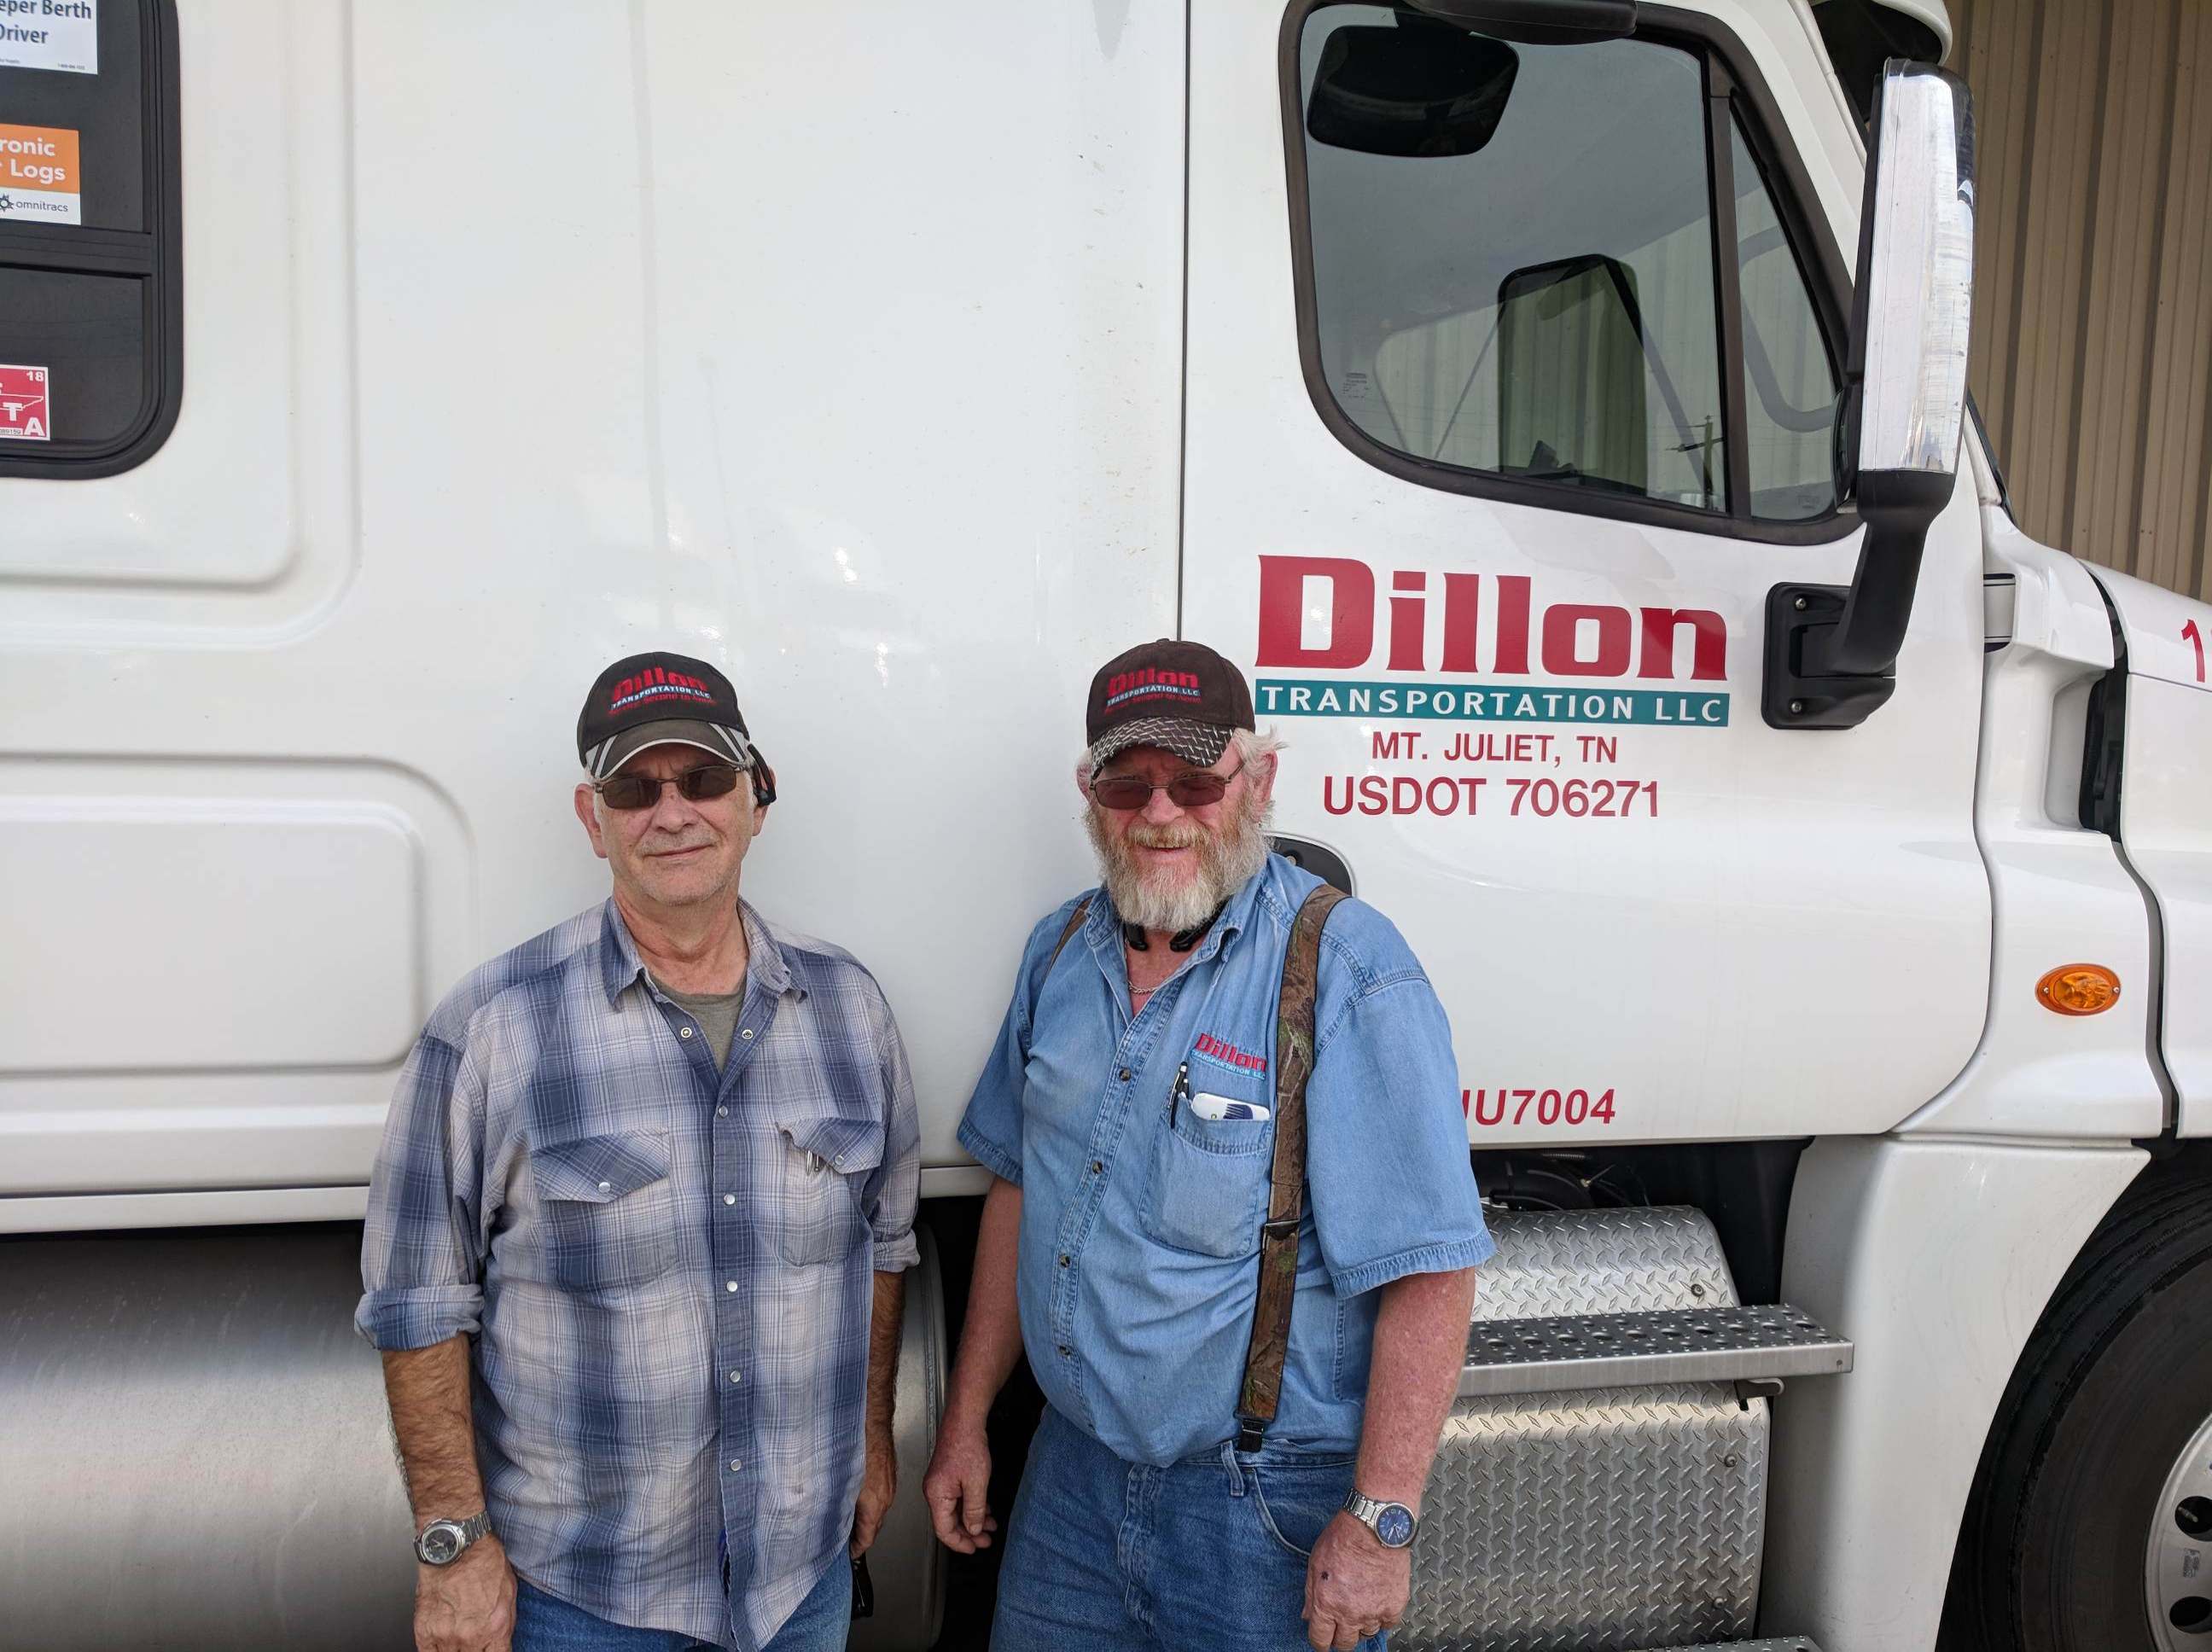 Congrats to Phil, trucker of the month, who also nearly won the